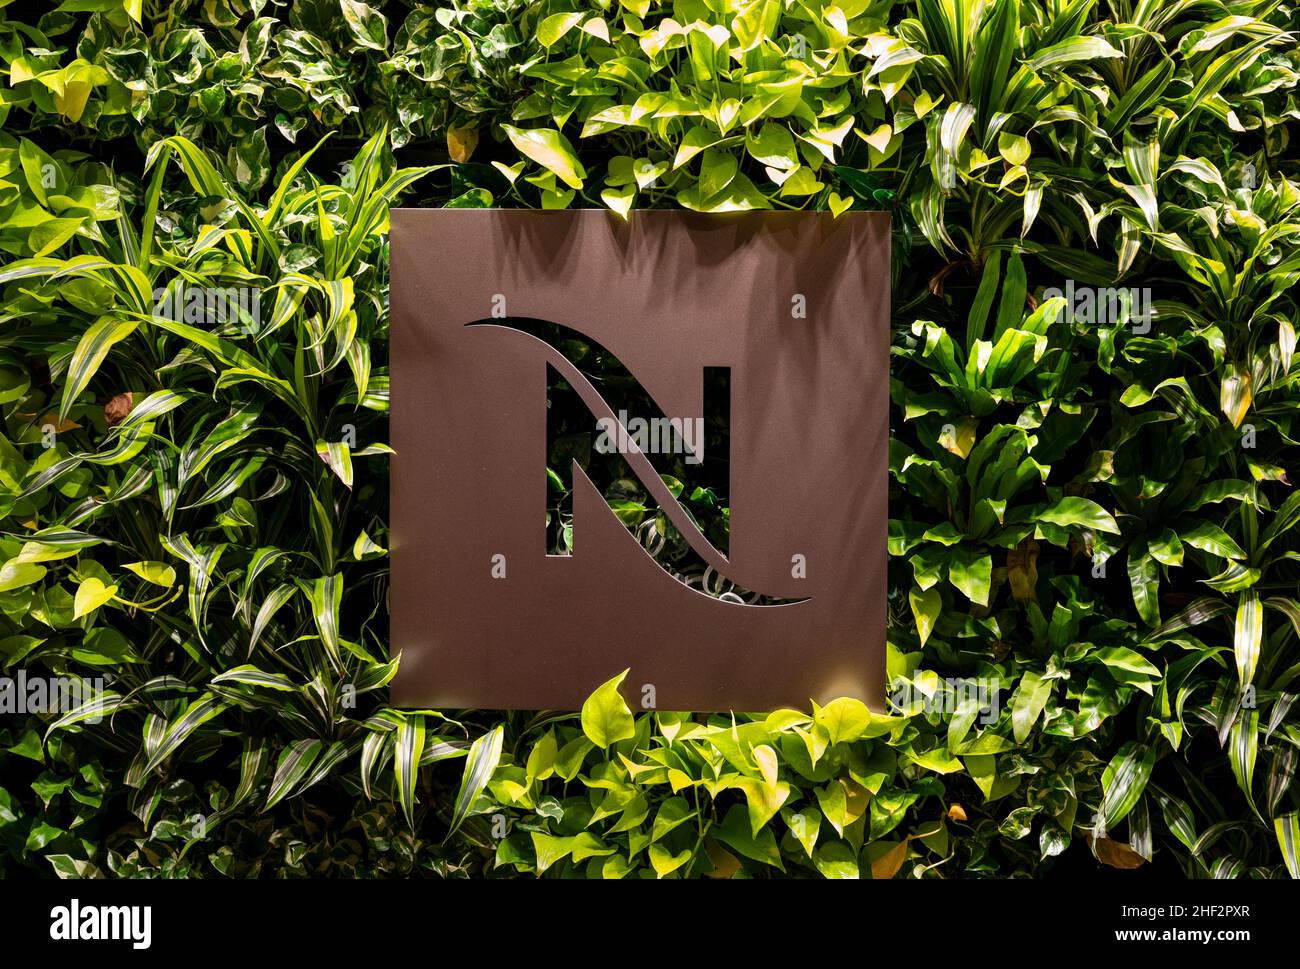 Swiss high-end and world leader in coffee capsules brand Nespresso logo seen at its store in Hong Kong. Stock Photo